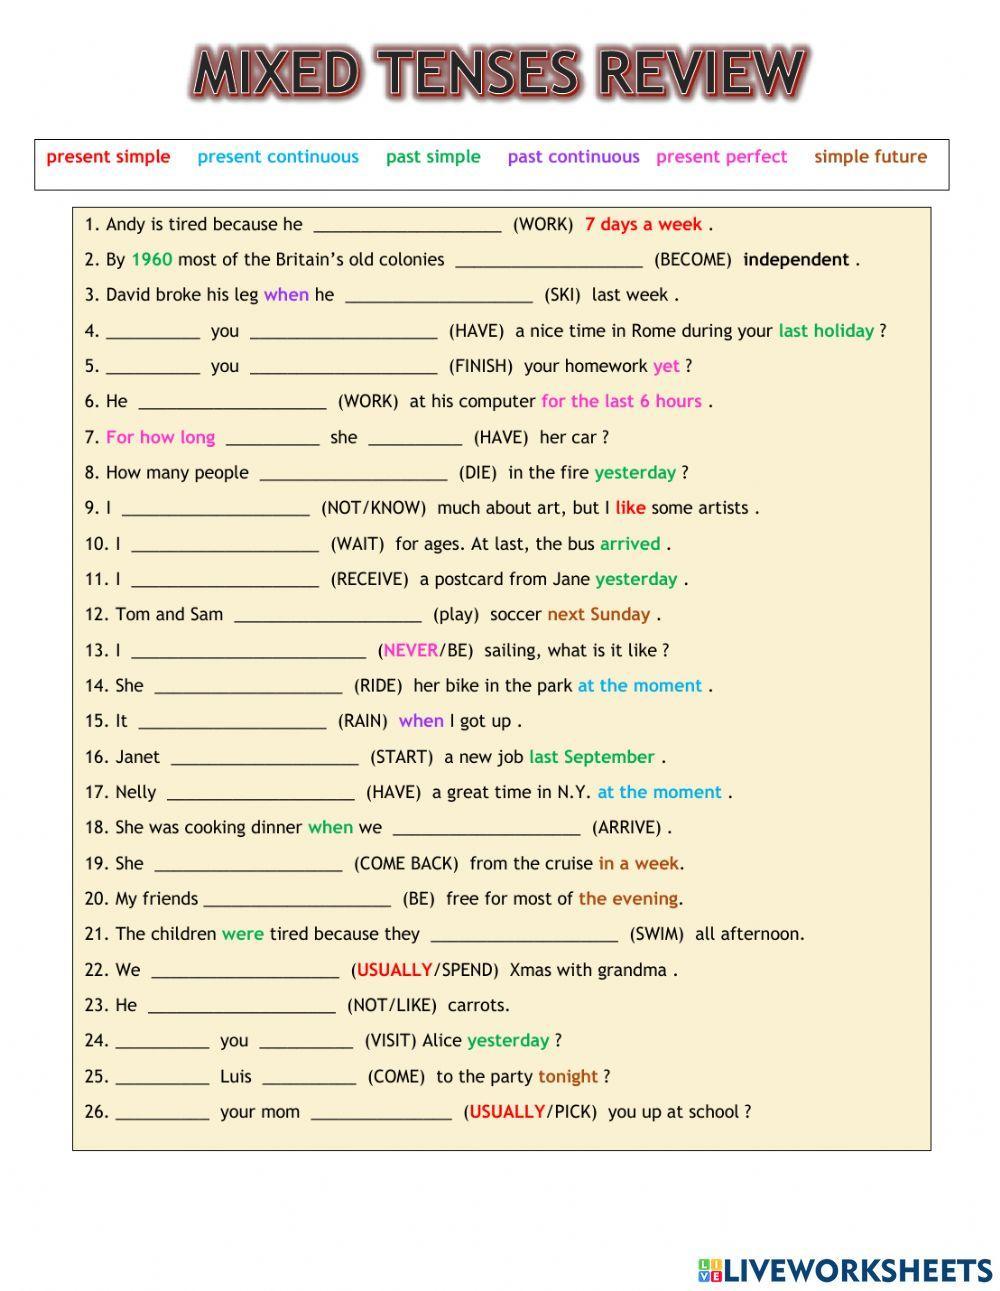 Mixed tenses review 1 worksheet | Live Worksheets